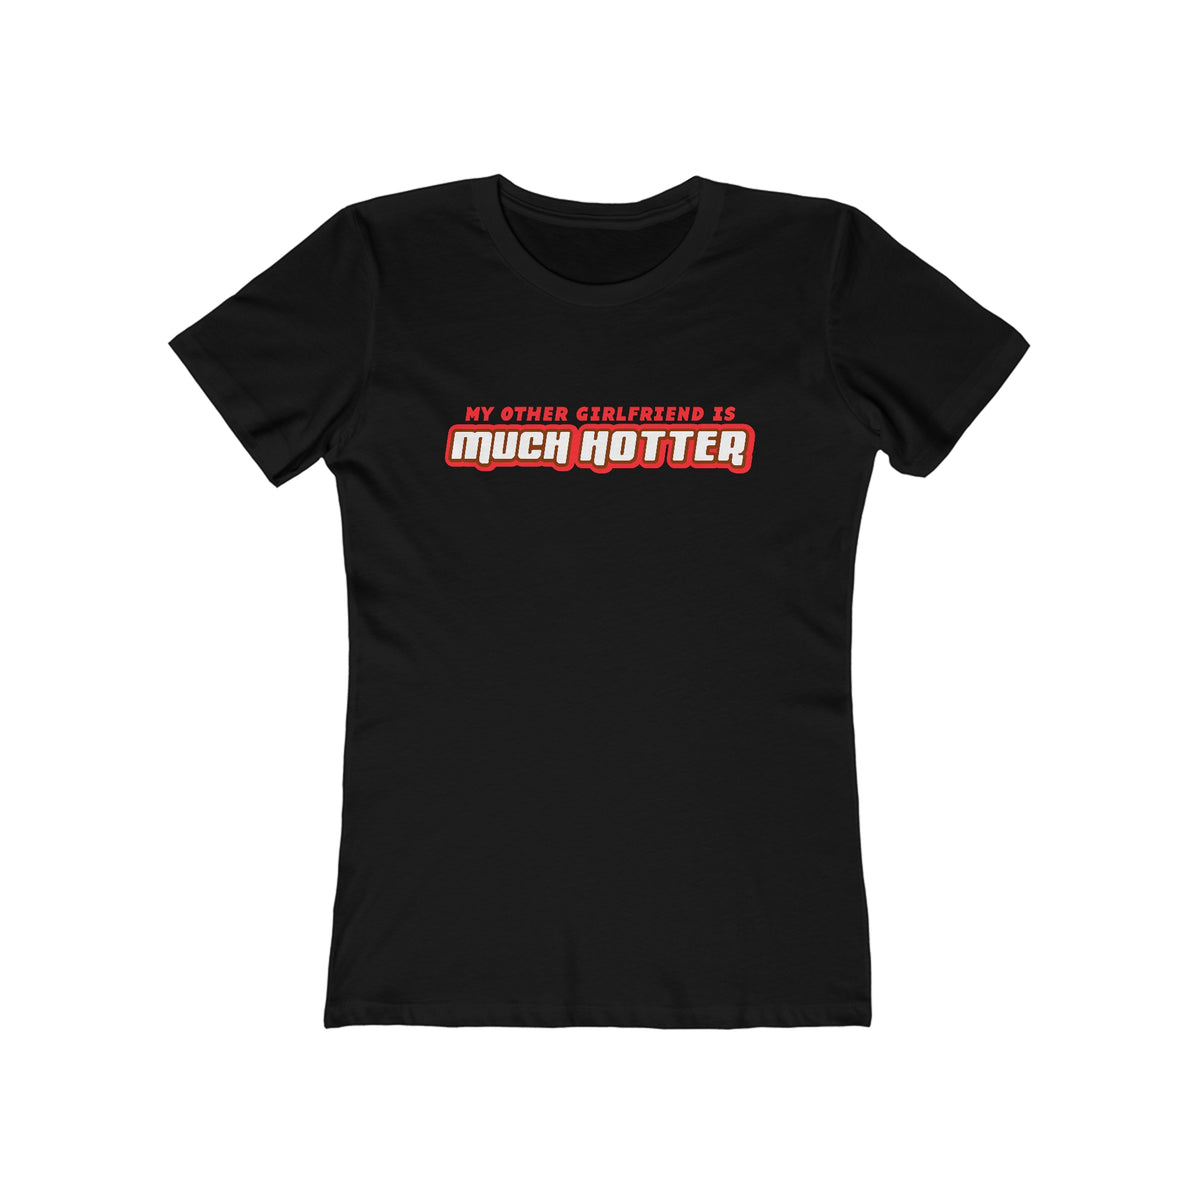 My Other Girlfriend Is Much Hotter - Women’s T-Shirts